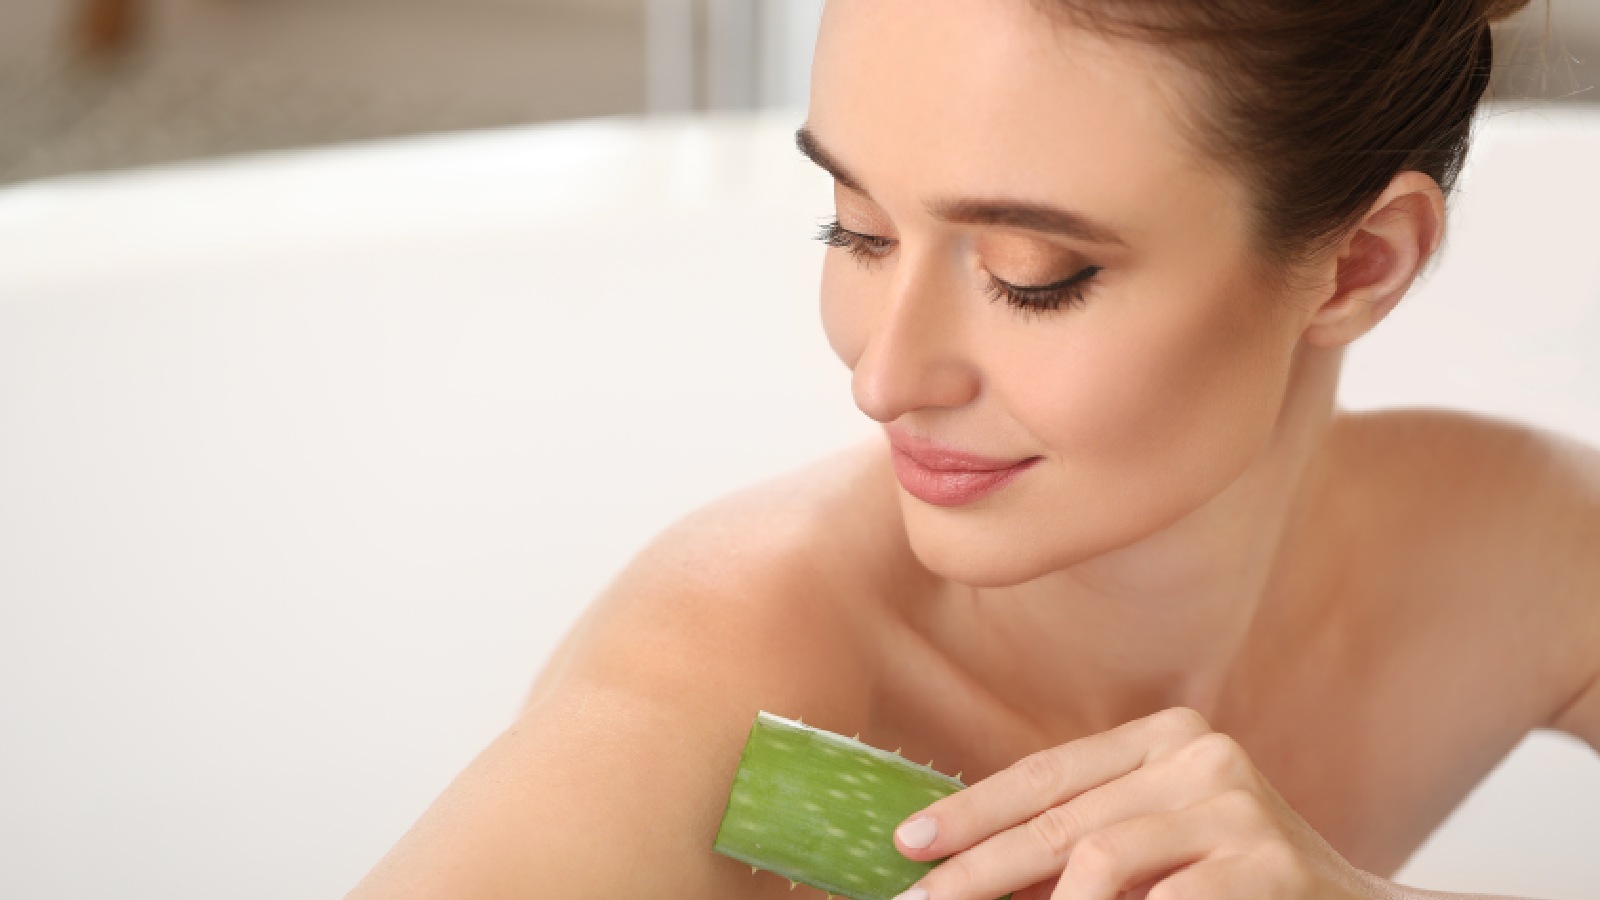 Aloe vera is an anti-aging agent. Know how to use it on the skin correctly.